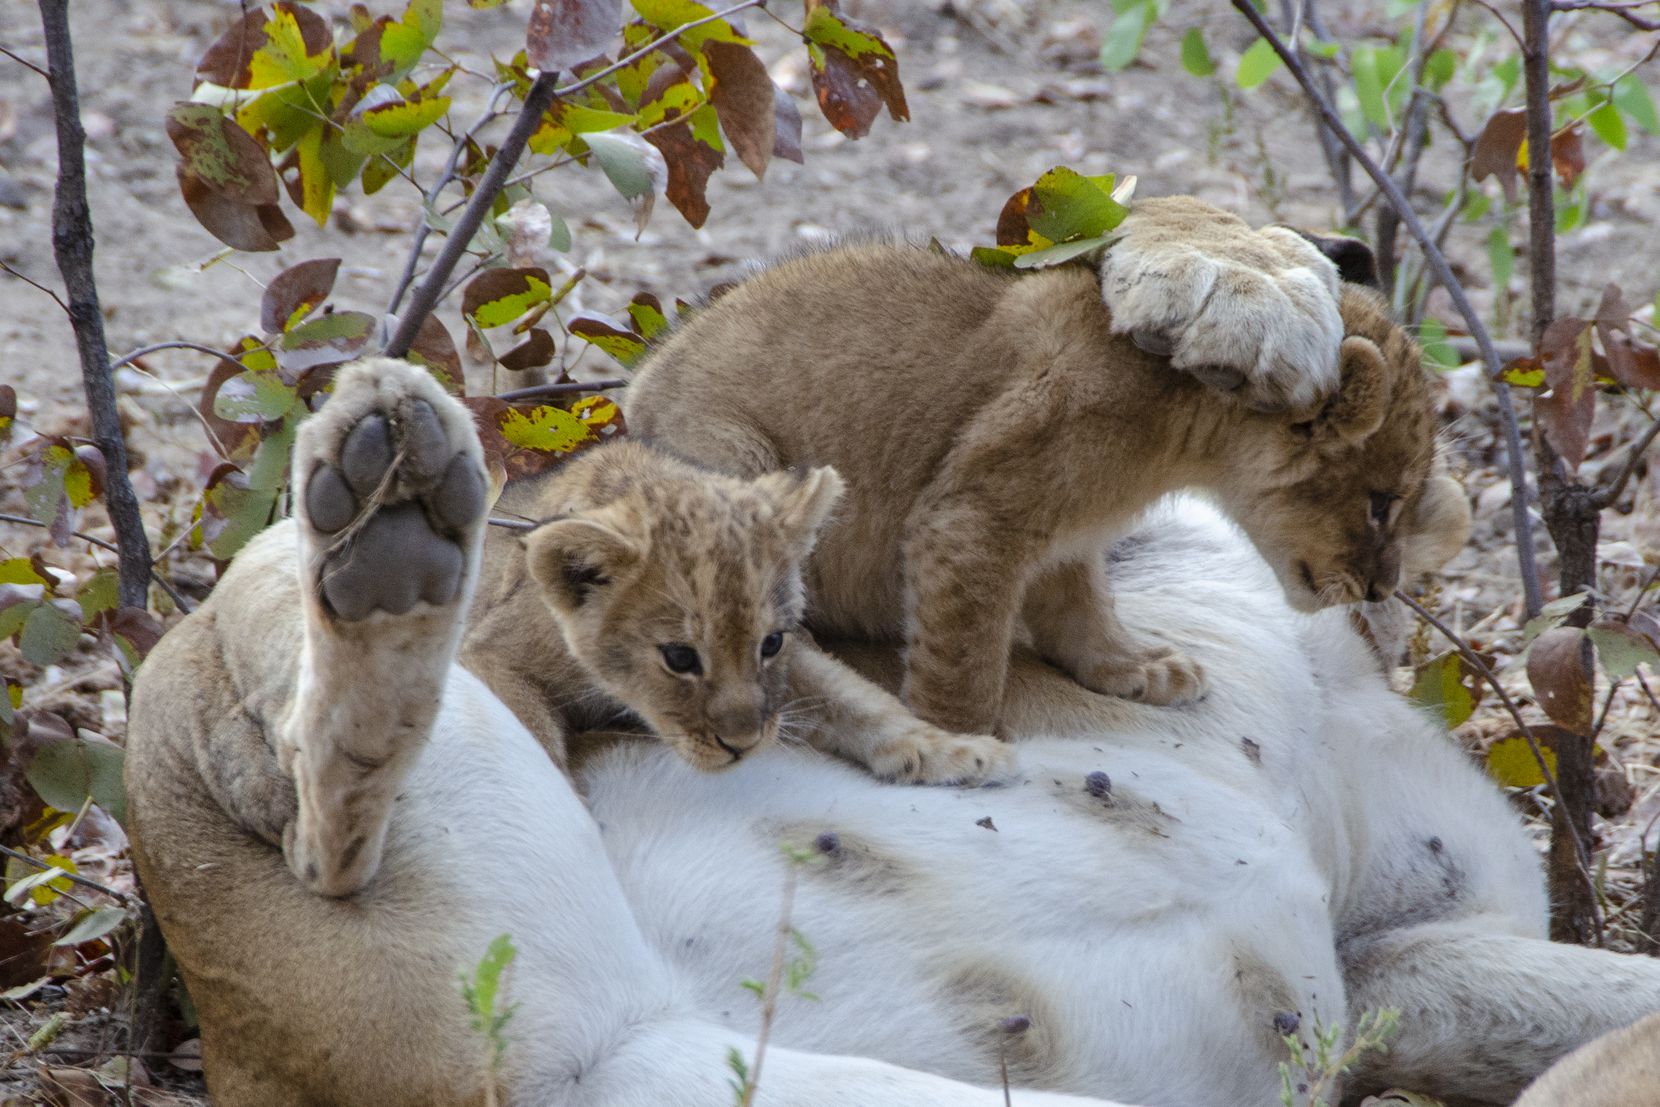 Two lion cubs play with their overfed mother in Zambia's South Luangwa National Park.